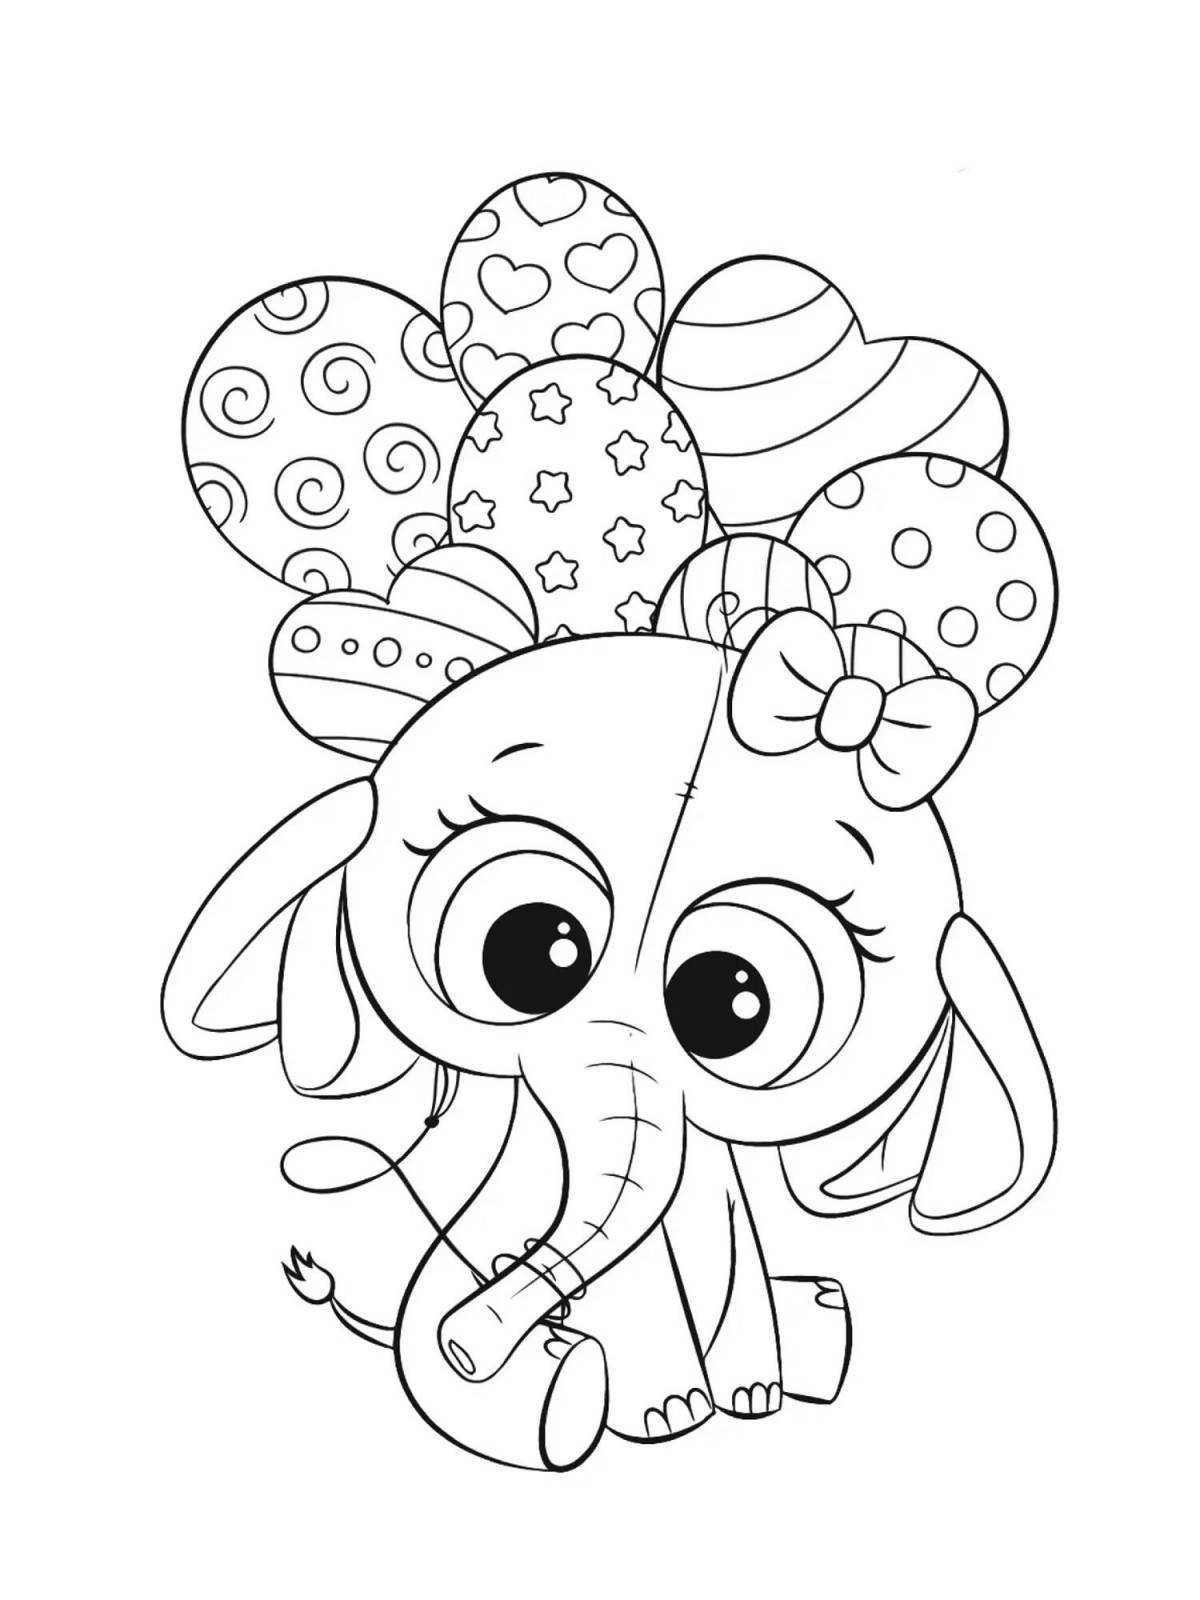 Animated animal coloring pages